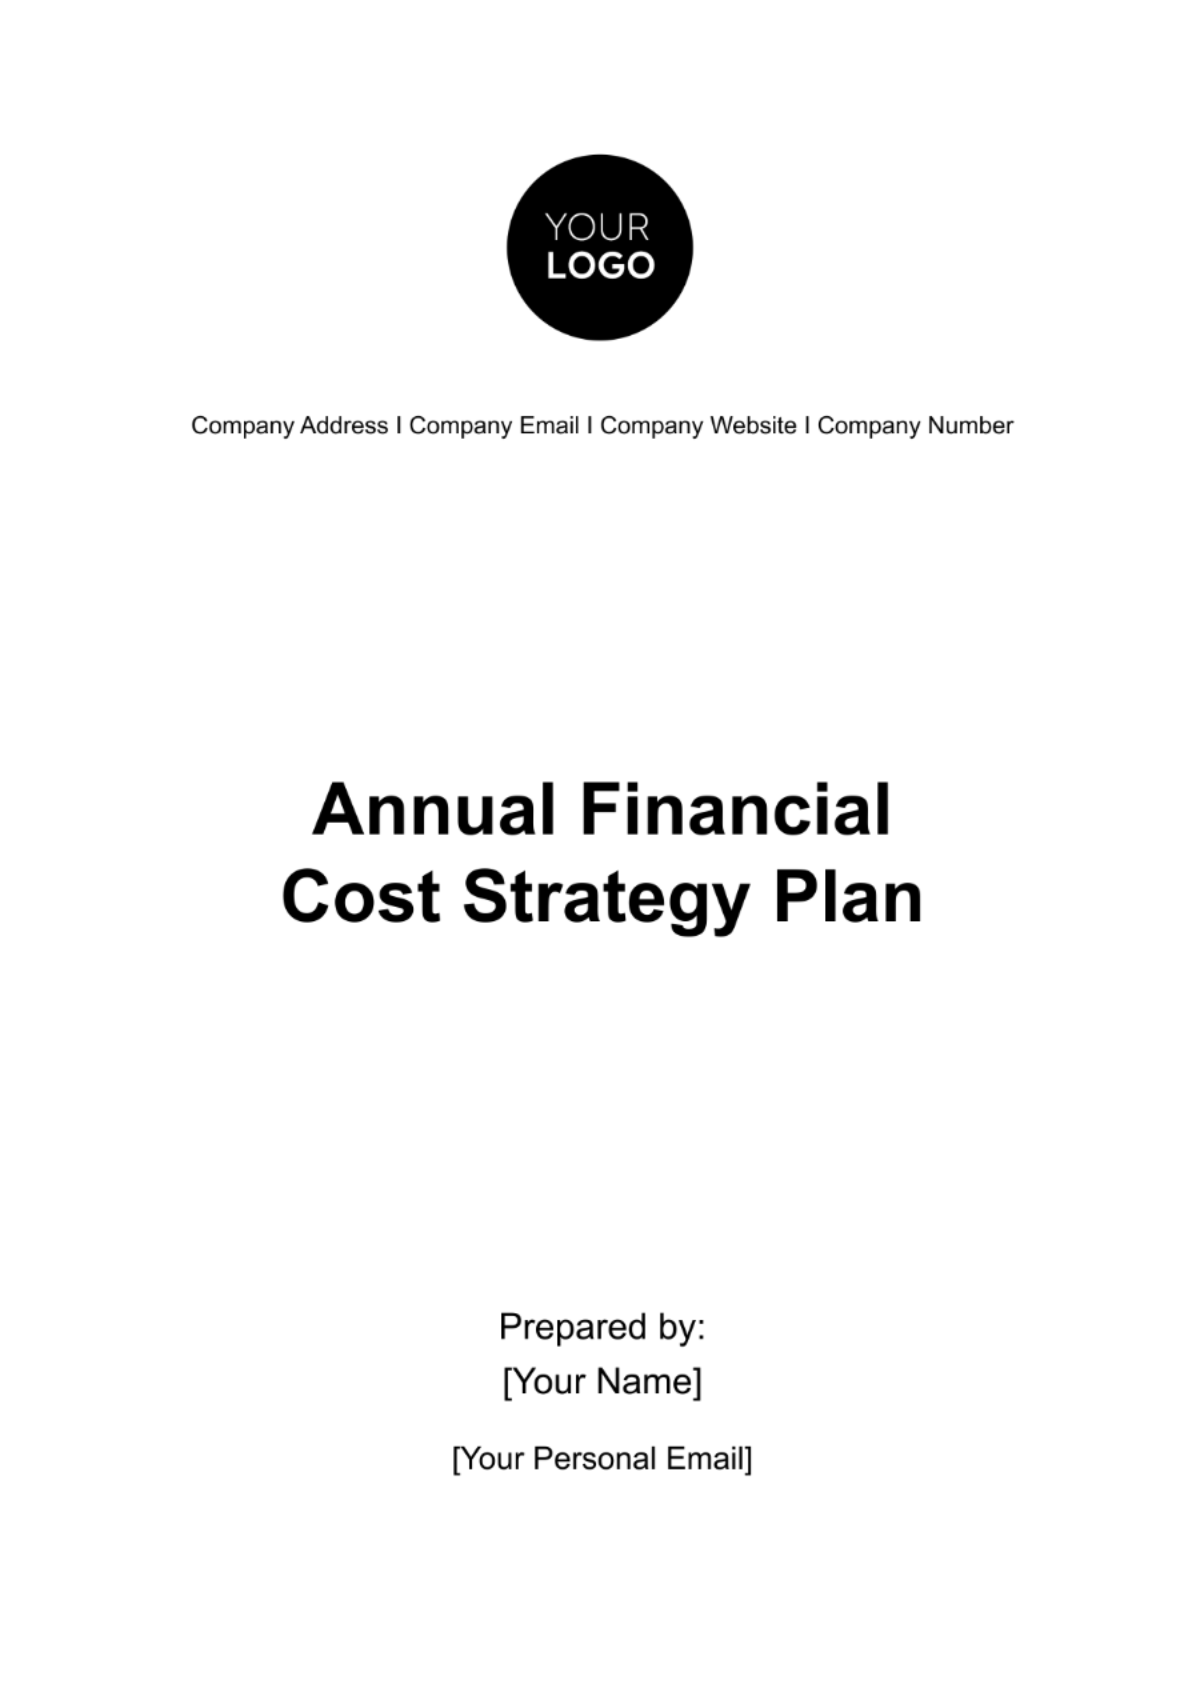 Annual Financial Cost Strategy Plan Template